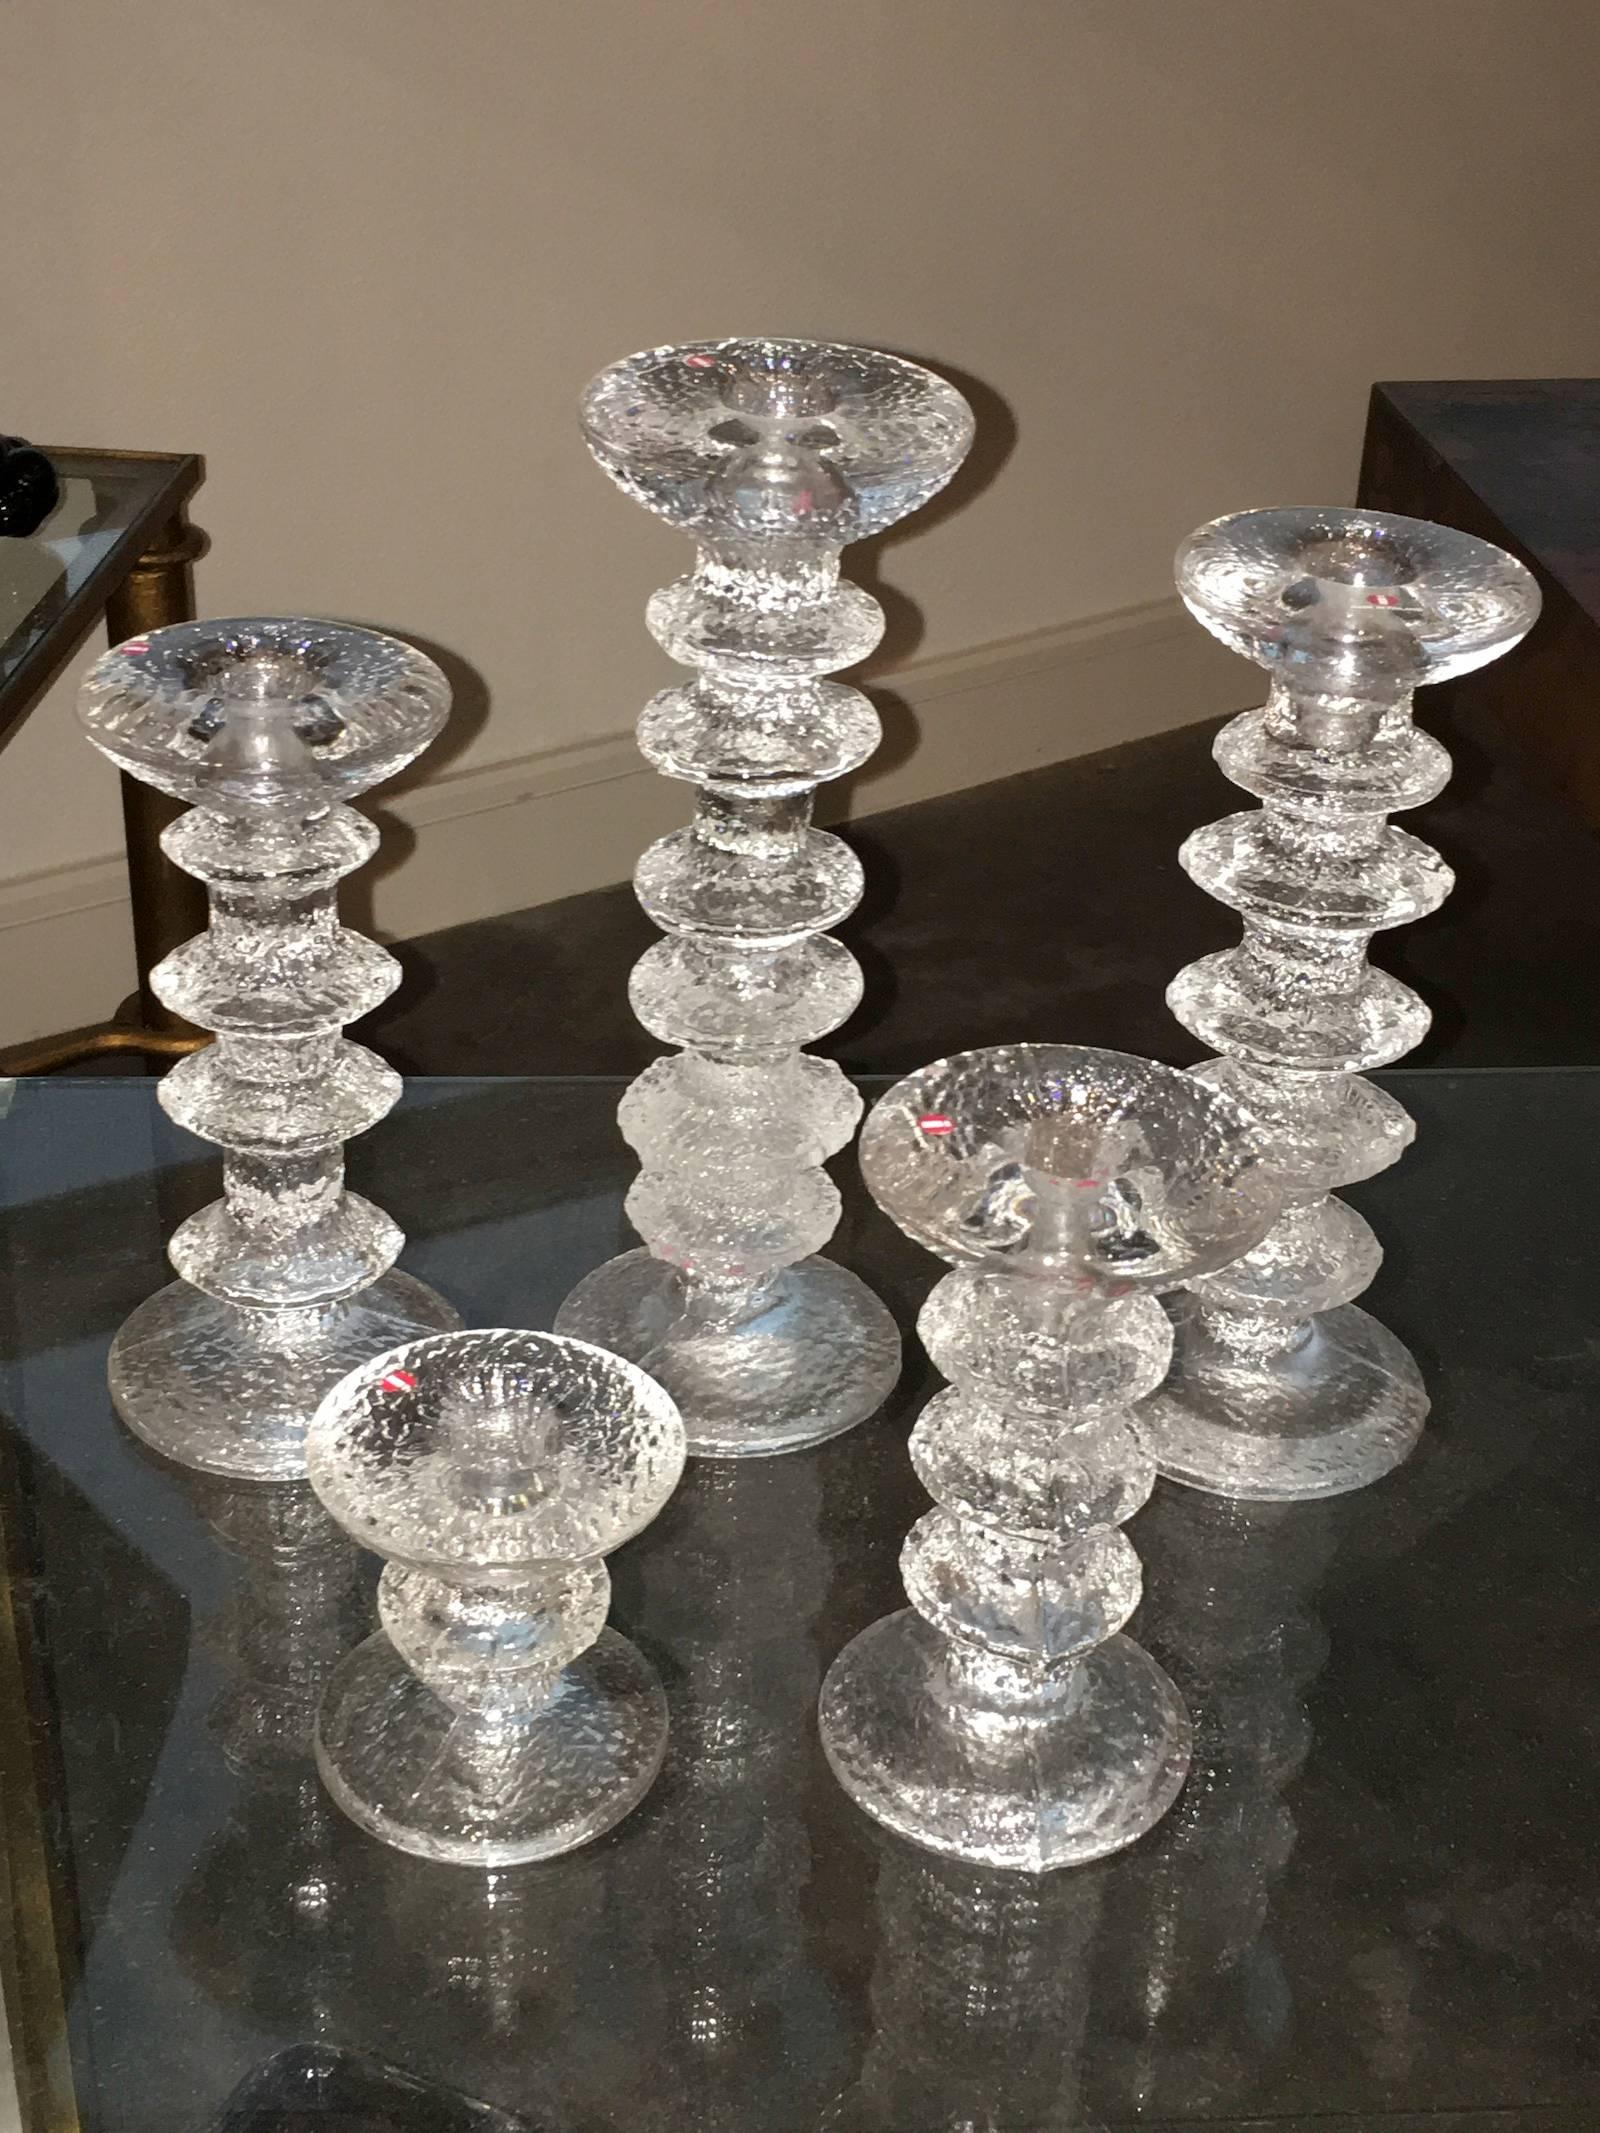 Five Kekkerit ice glass candle stick holder. Made in Finland by Timo Sarpaneva. Tallest is approximately 9 1/2 high, smallest 3 1/4 high.